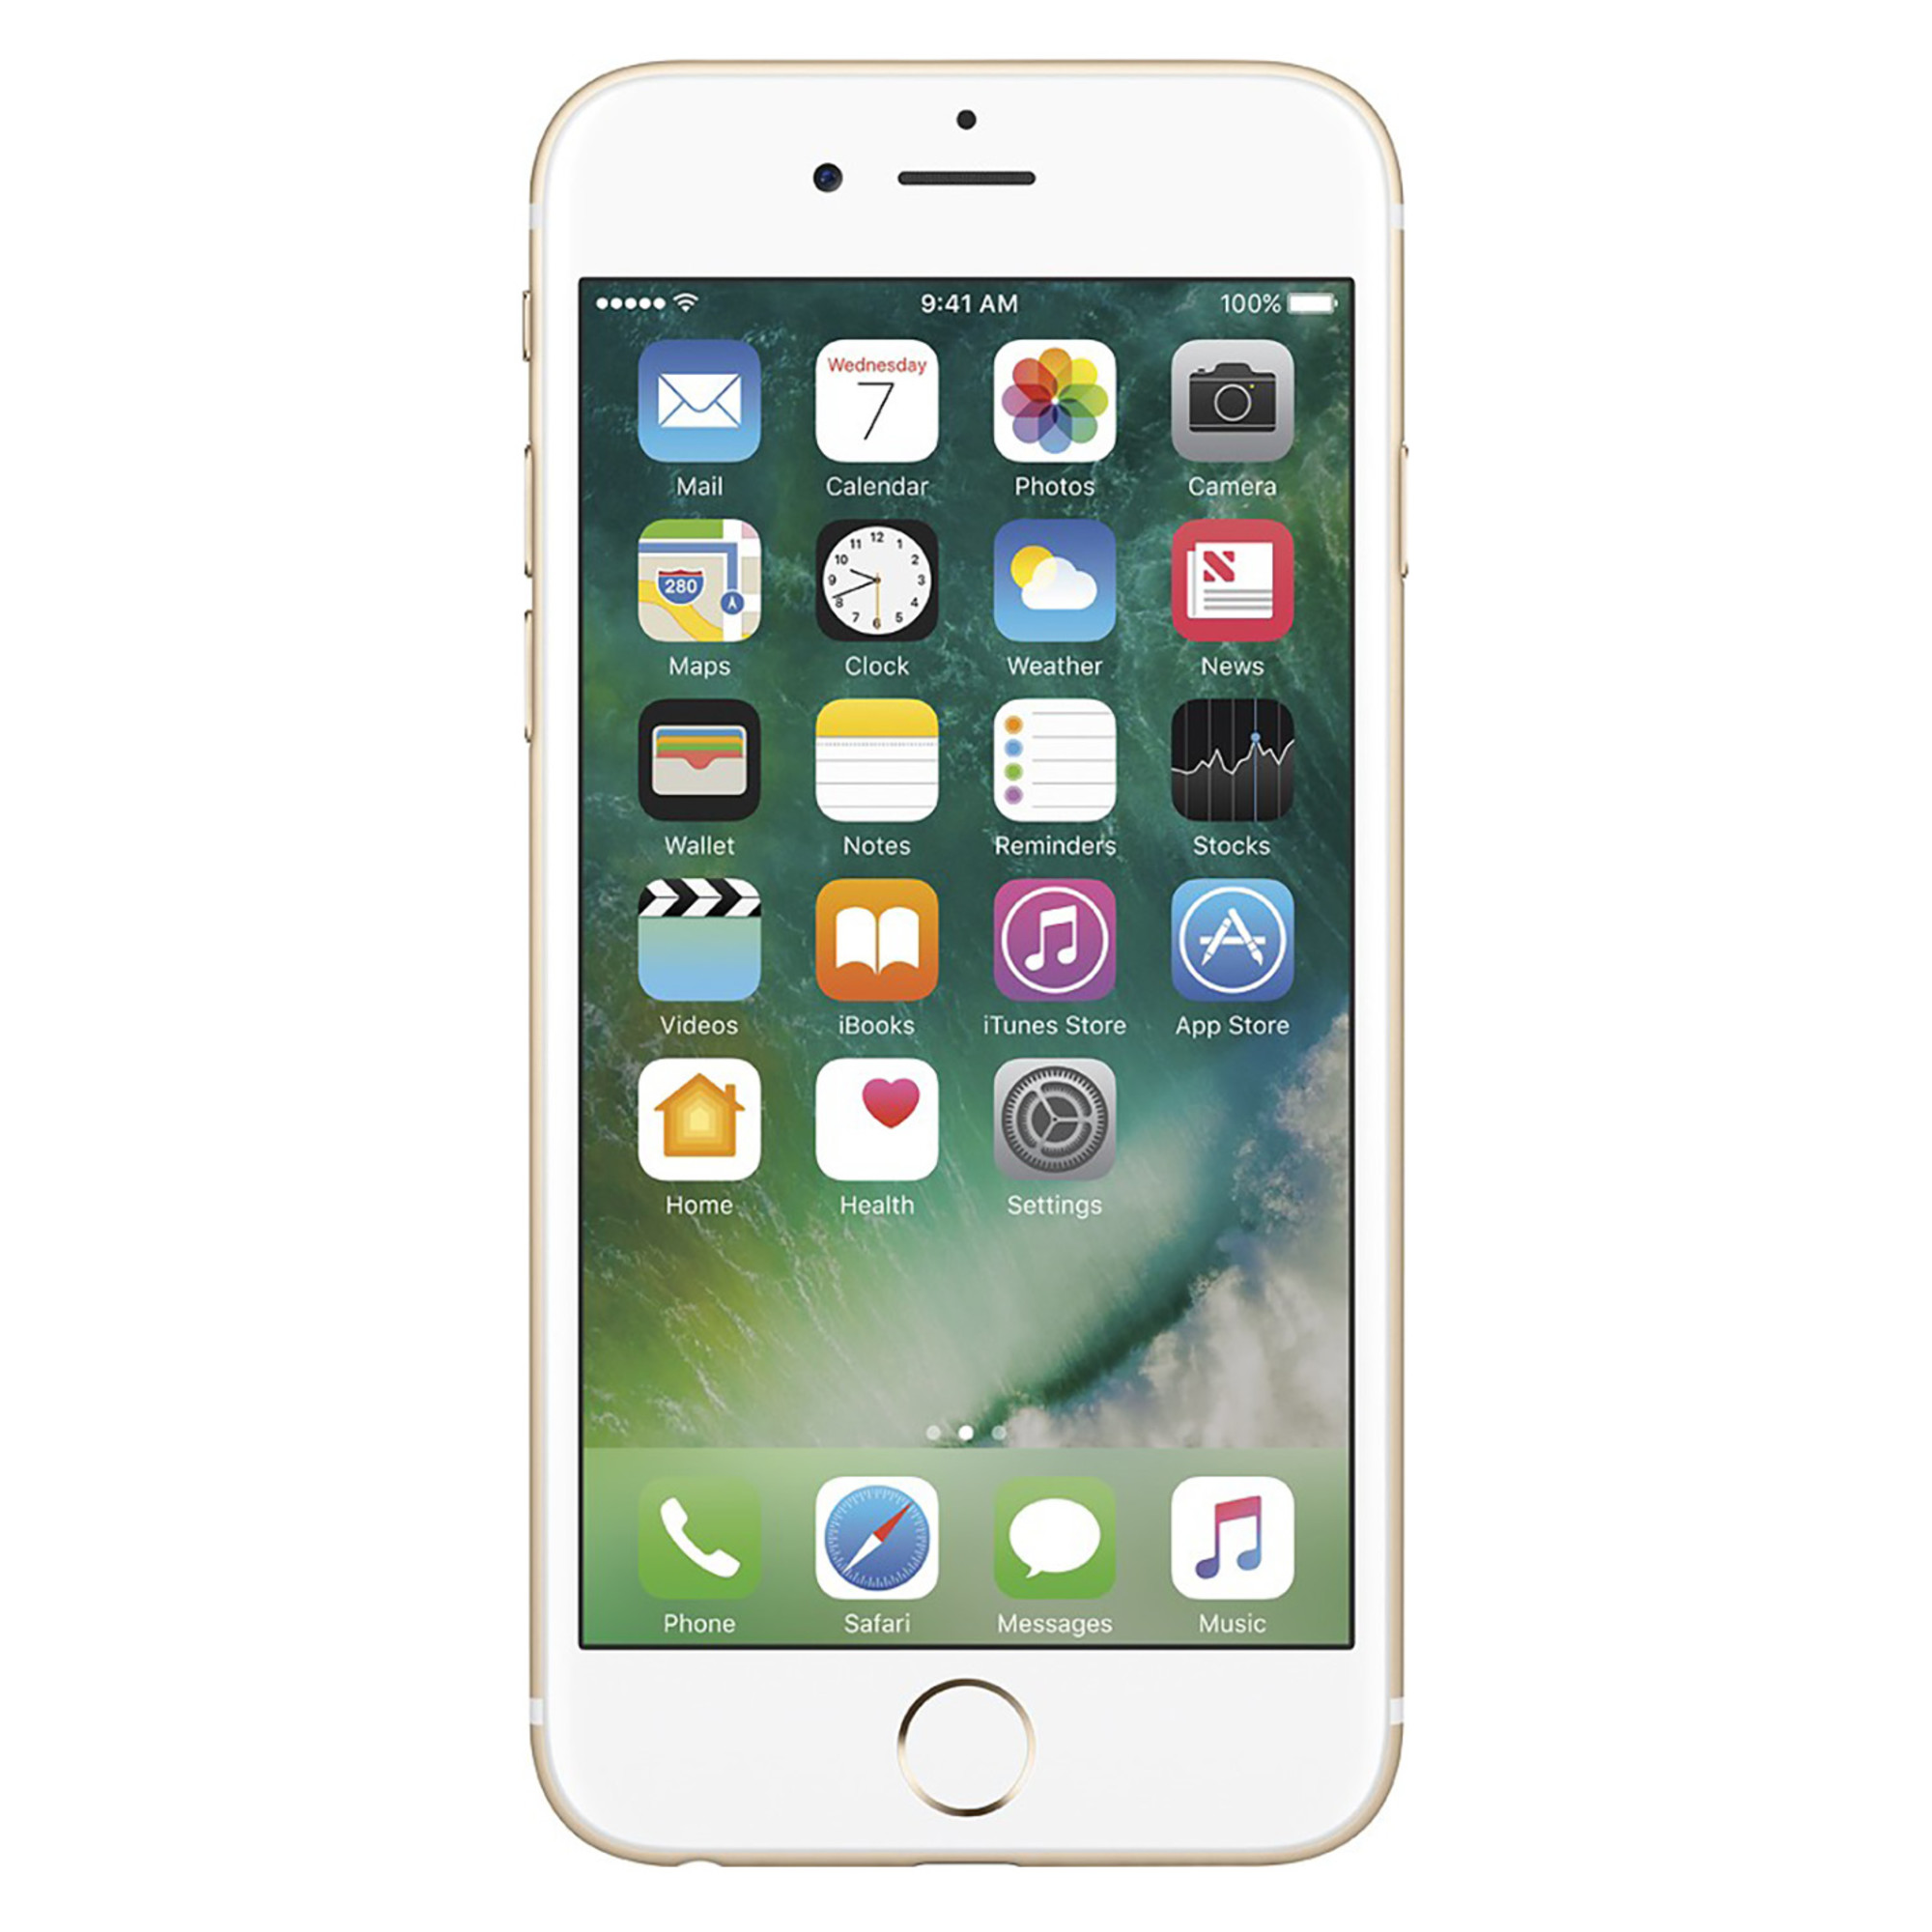 Pre-Owned Apple iPhone 6s 128GB GSM Phone - Gold + WeCare Alcohol Wipes Pack (50 Wipes) (Refurbished: Good) - image 2 of 6